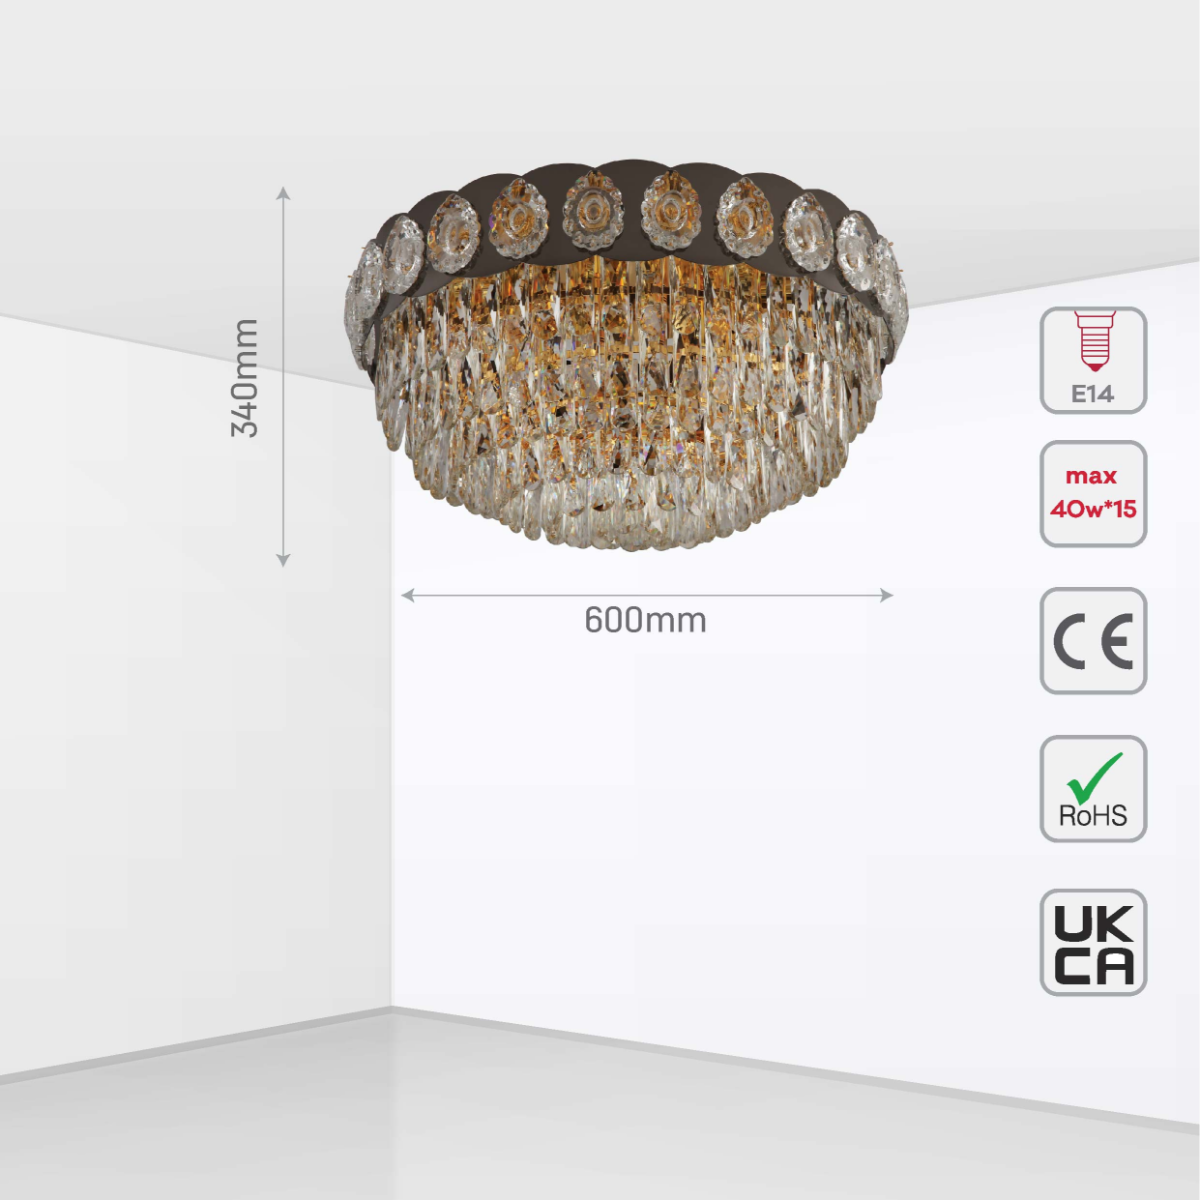 Size and certifications of Luxury Clear Crystal Flush Modern Ceiling Chandelier Light Gold | TEKLED 159-18009